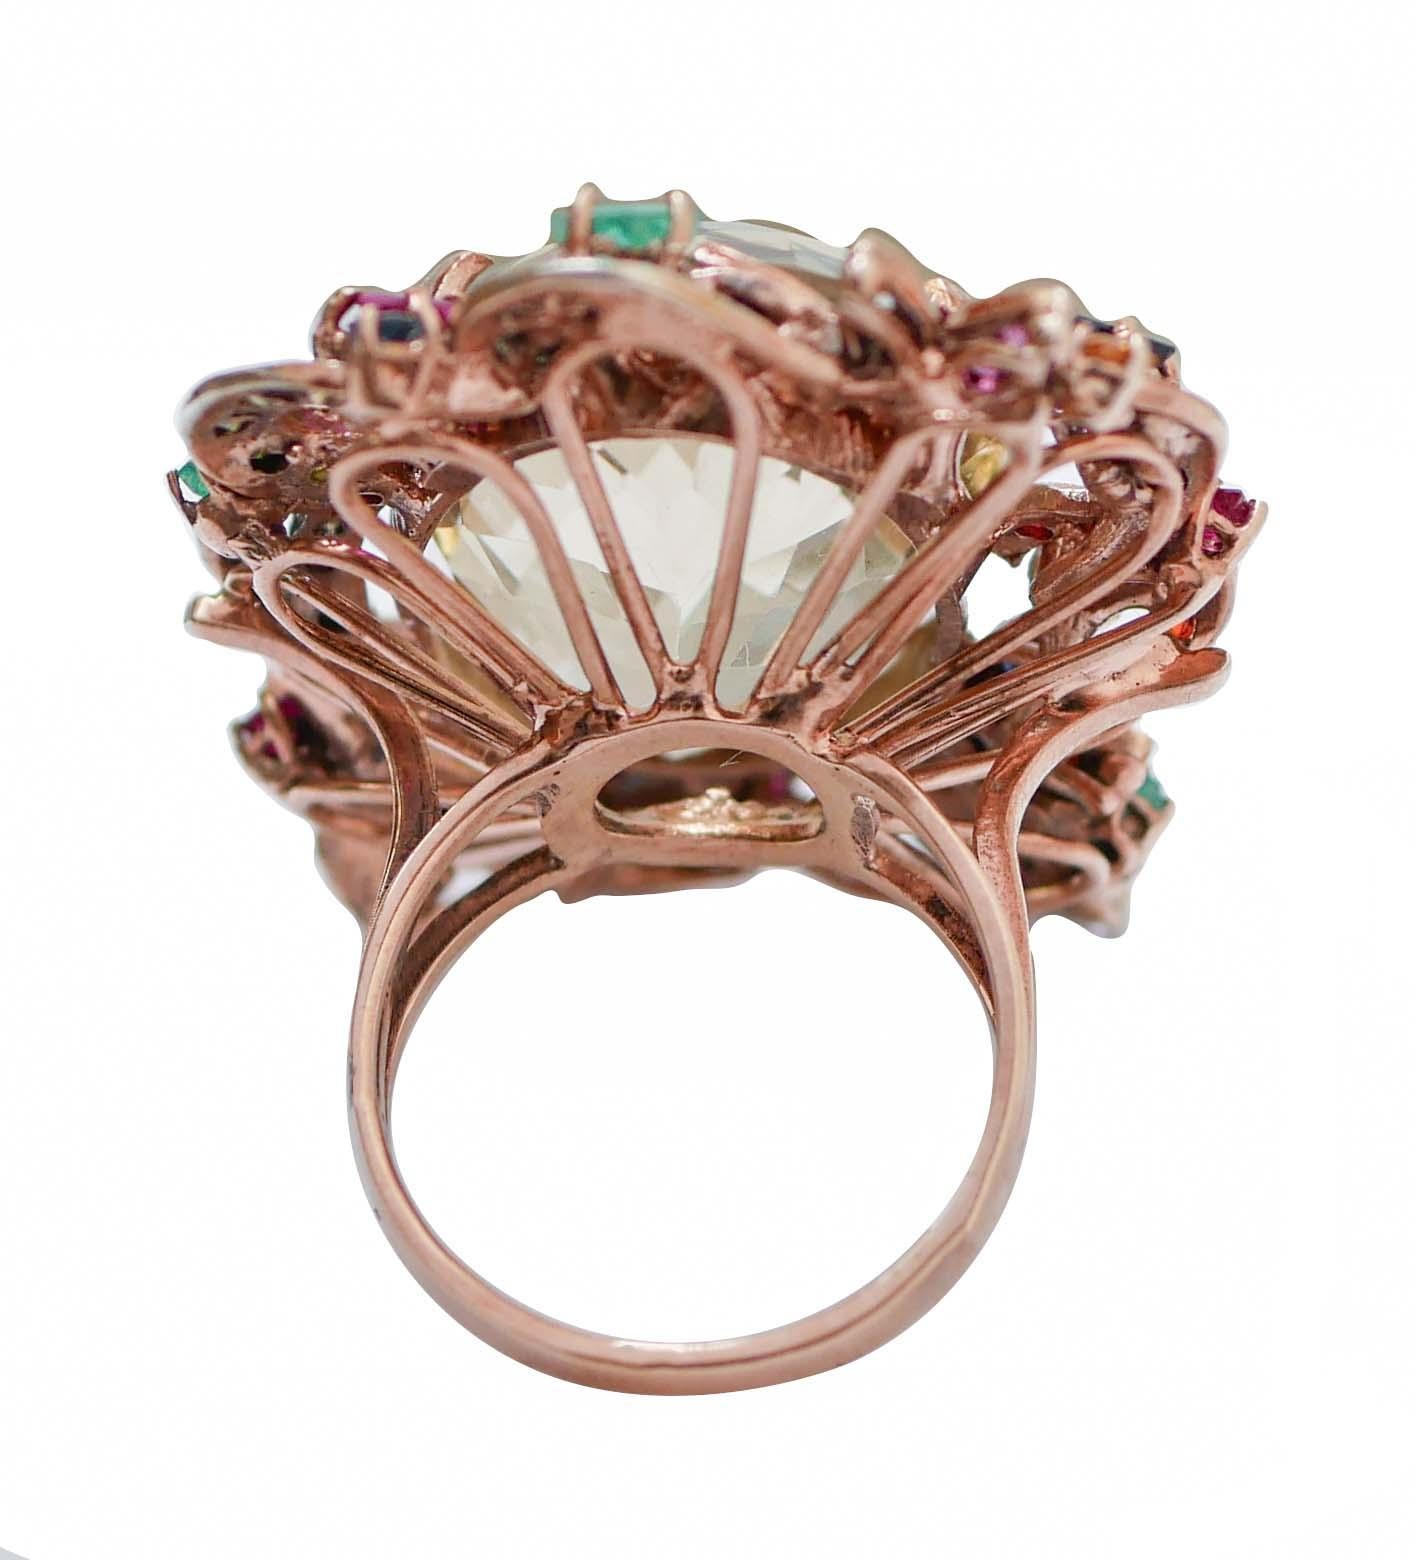 Retro Topaz, Emeralds, Rubies, Sapphires, Diamonds, Rose Gold and Silver Ring. For Sale